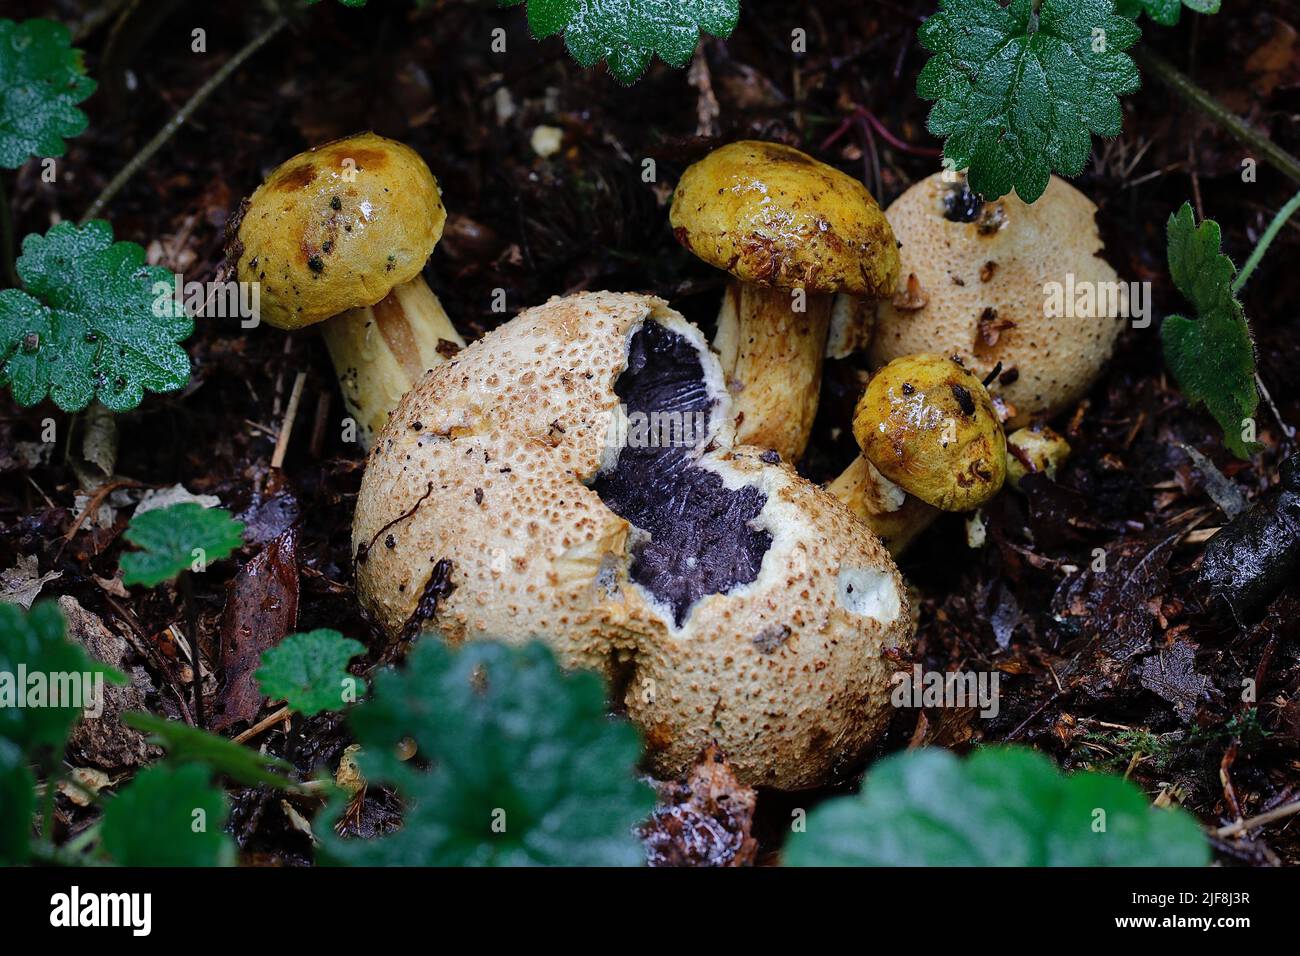 The uncommon Parasitic Bolete (Boletus parasiticus), growing on its typical host fungus, the Common Earthball (Scleroderma citrinum) Stock Photo